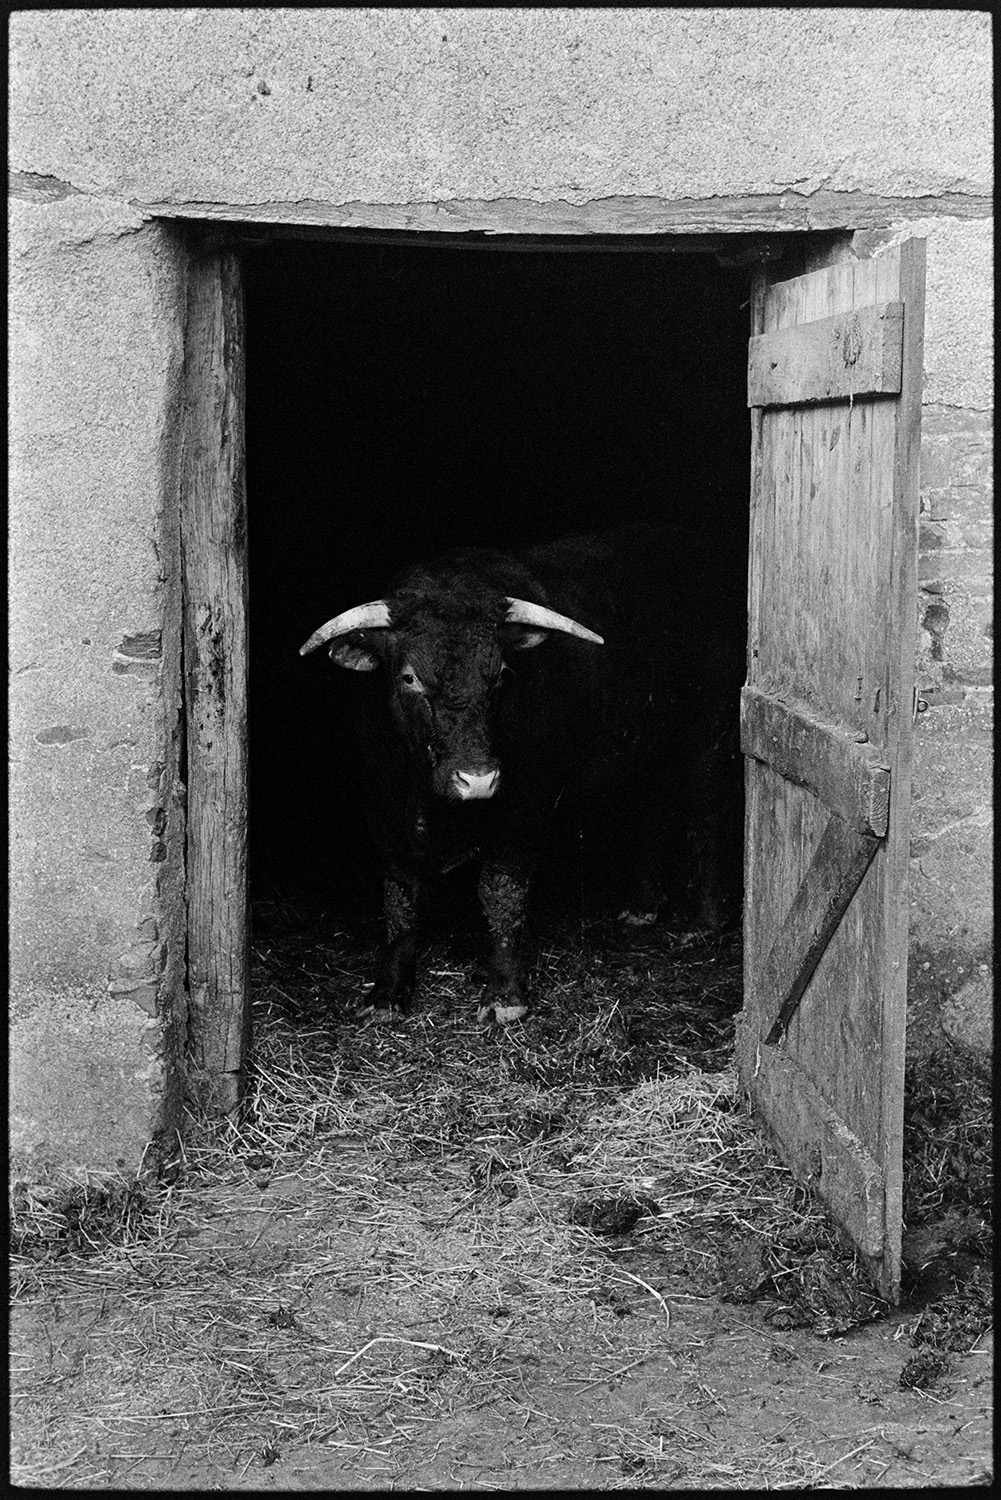 Horned bullocks and dog. 
[A horned bullock stood in an open barn doorway at Parsonage, Iddesleigh.]